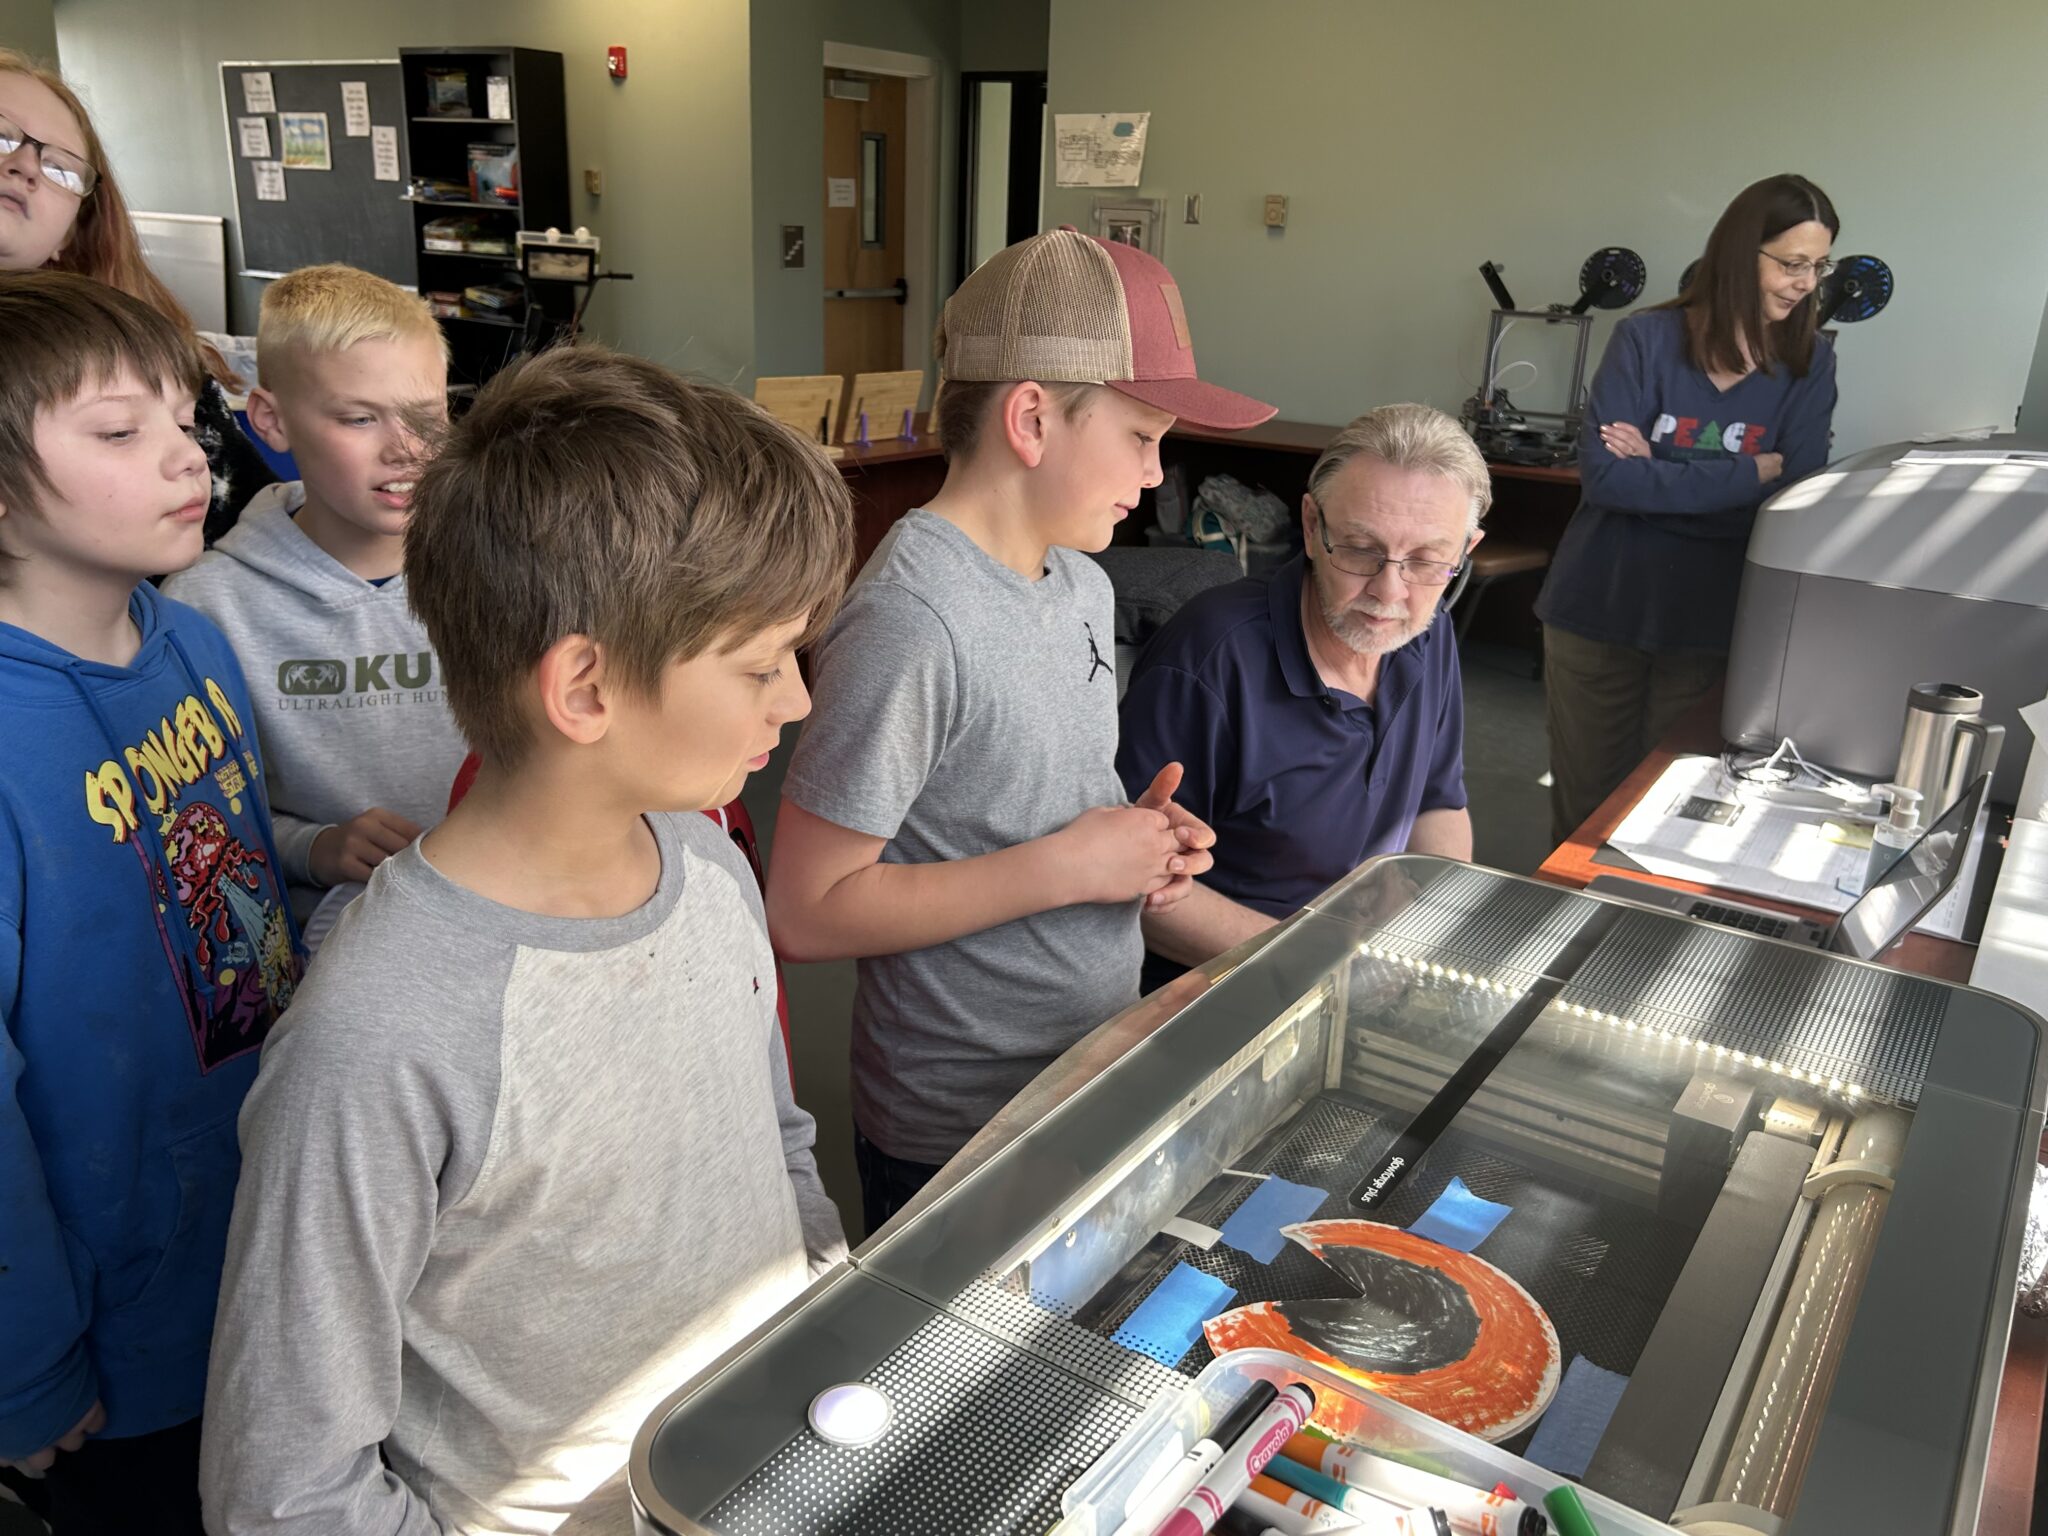 George Hebb, of The Computer Shop in Oakland, MD, works with students on the laser engraver to cut out eyeholes for eclipse glasses on student-designed paper plate sun masks.